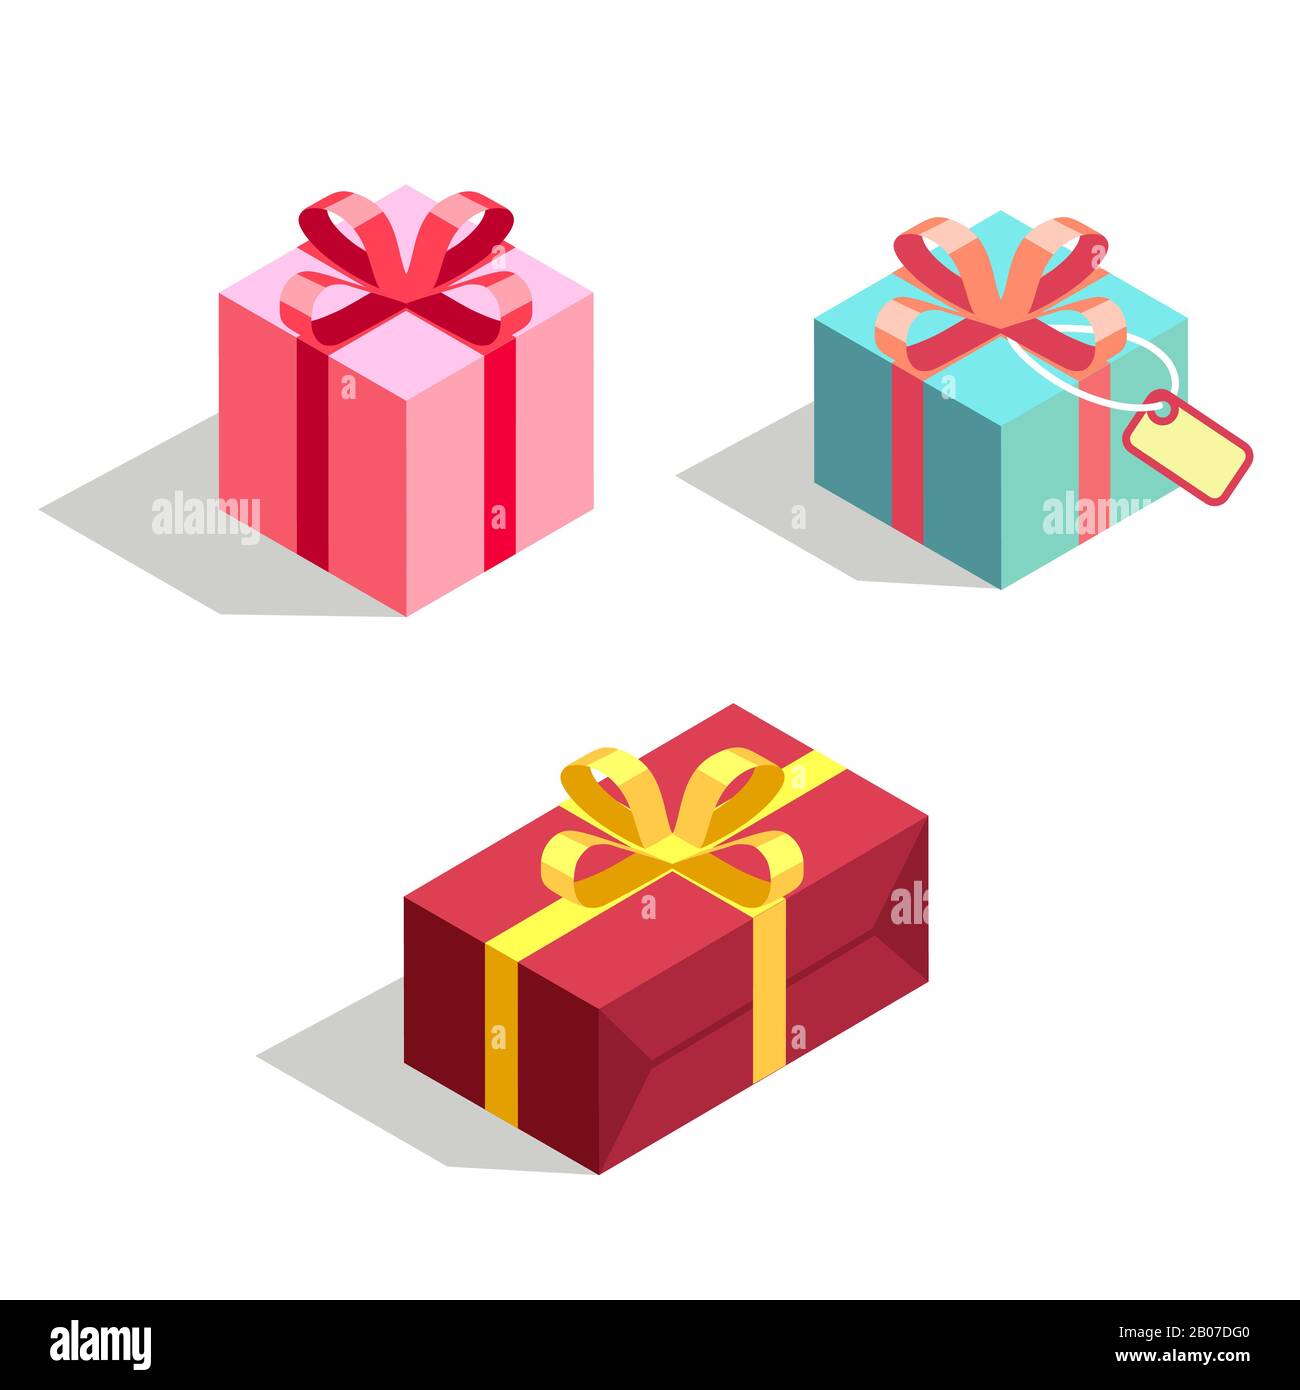 Set of gift box 3d isometric. Isolated cardboard boxes. Vector illustration Stock Vector